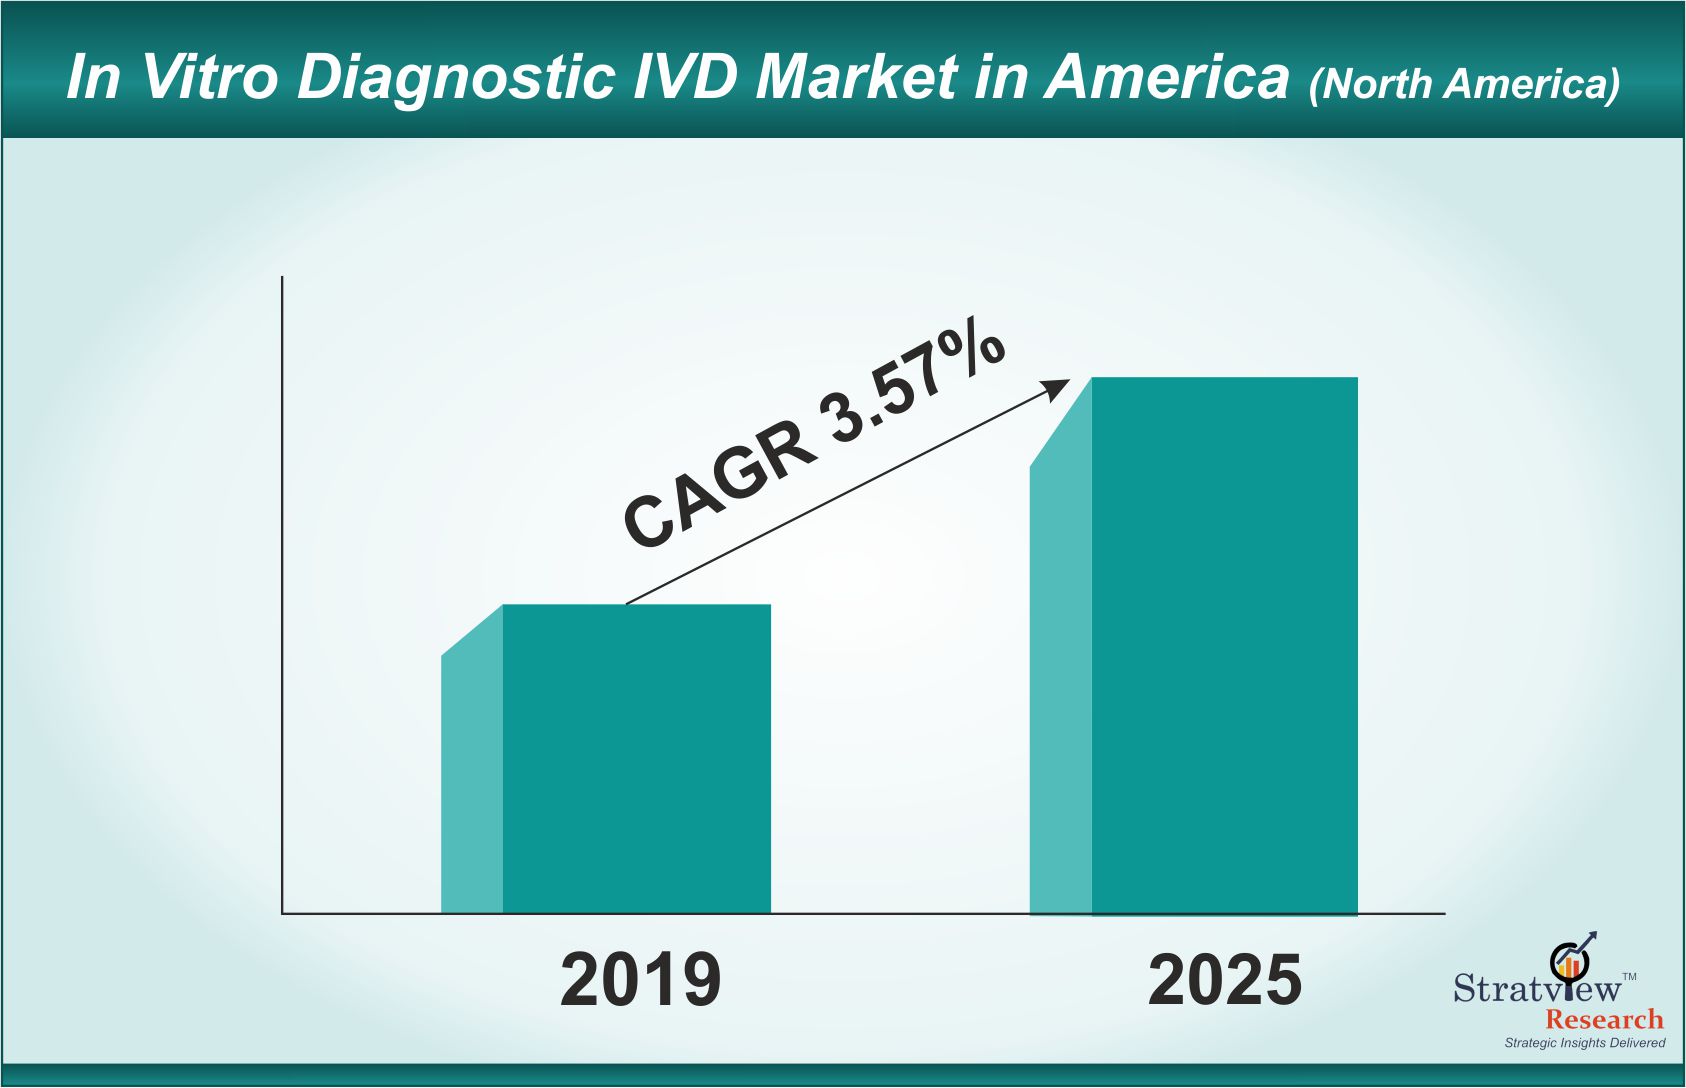 In Vitro Diagnostic IVD Market in America to Grow Even Better By 2019-2025